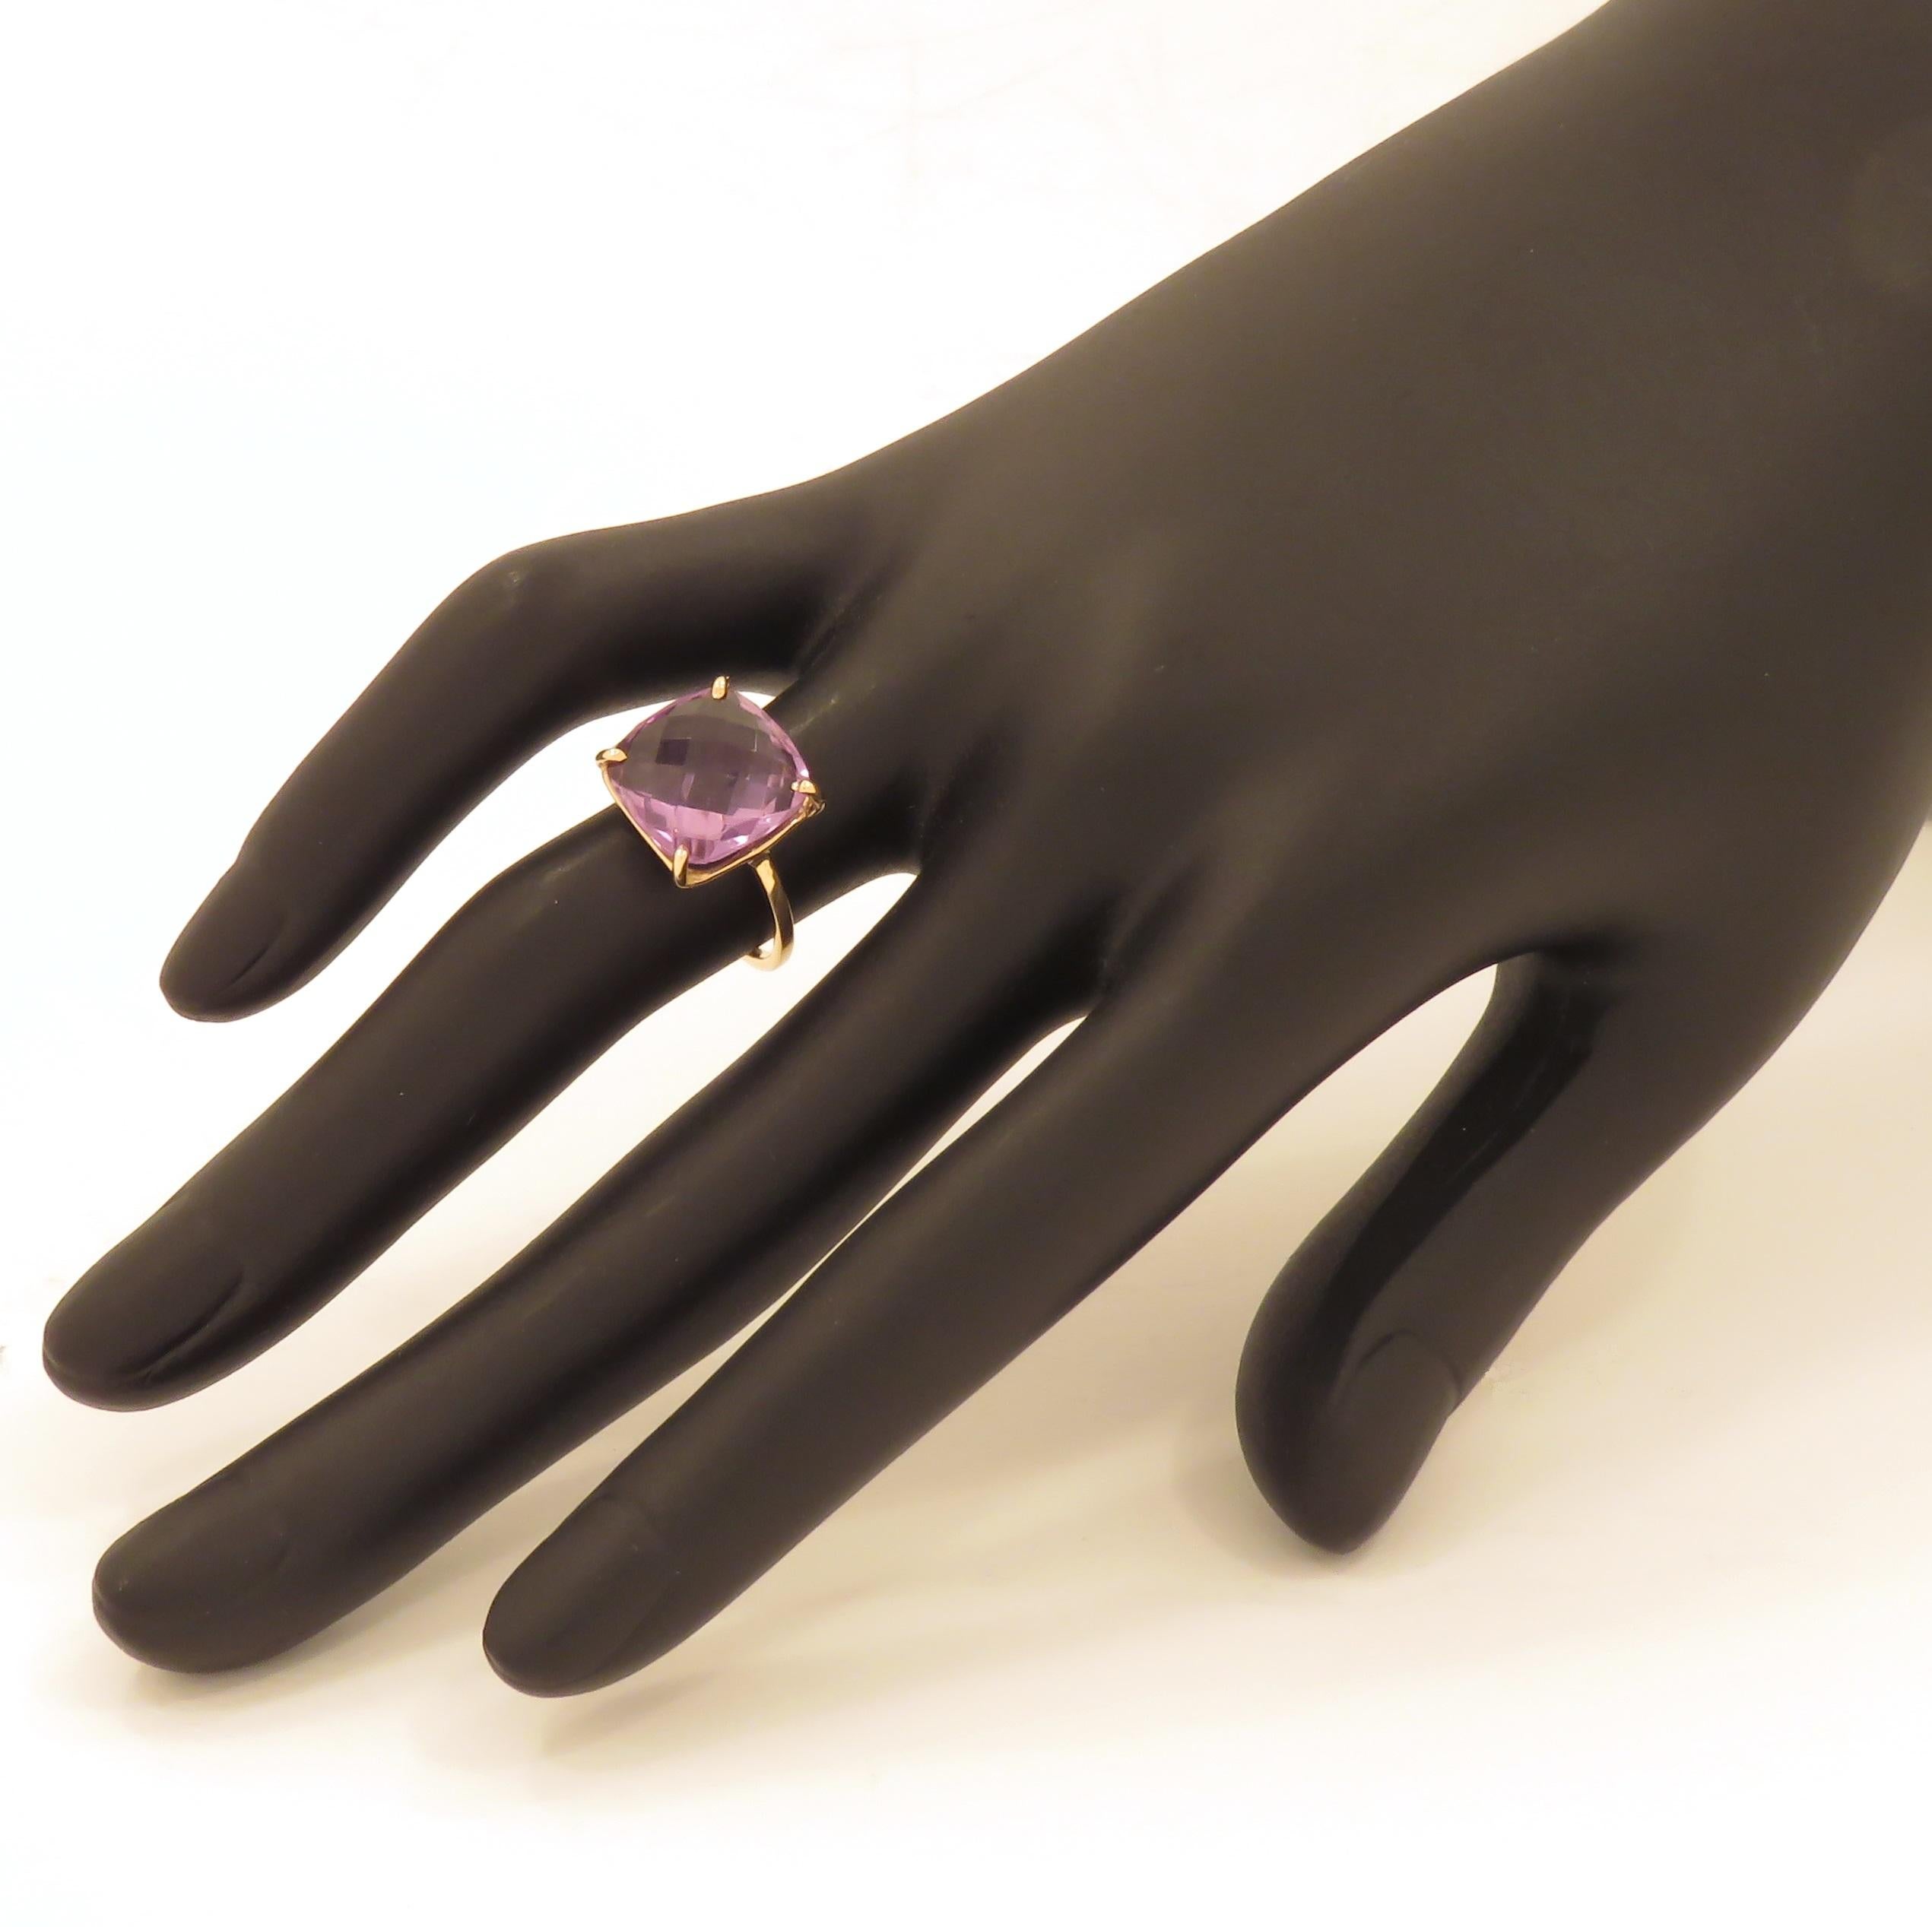 Beautiful amethyst featured in a contemporary ring crafted in 9 karat rose gold. The amethyst is briolette cut  and square shaped and is held by 4 claws. The size of the gemstone is 12x12 mm / 0.472x0.472 inches. US finger size is 6.75, French size